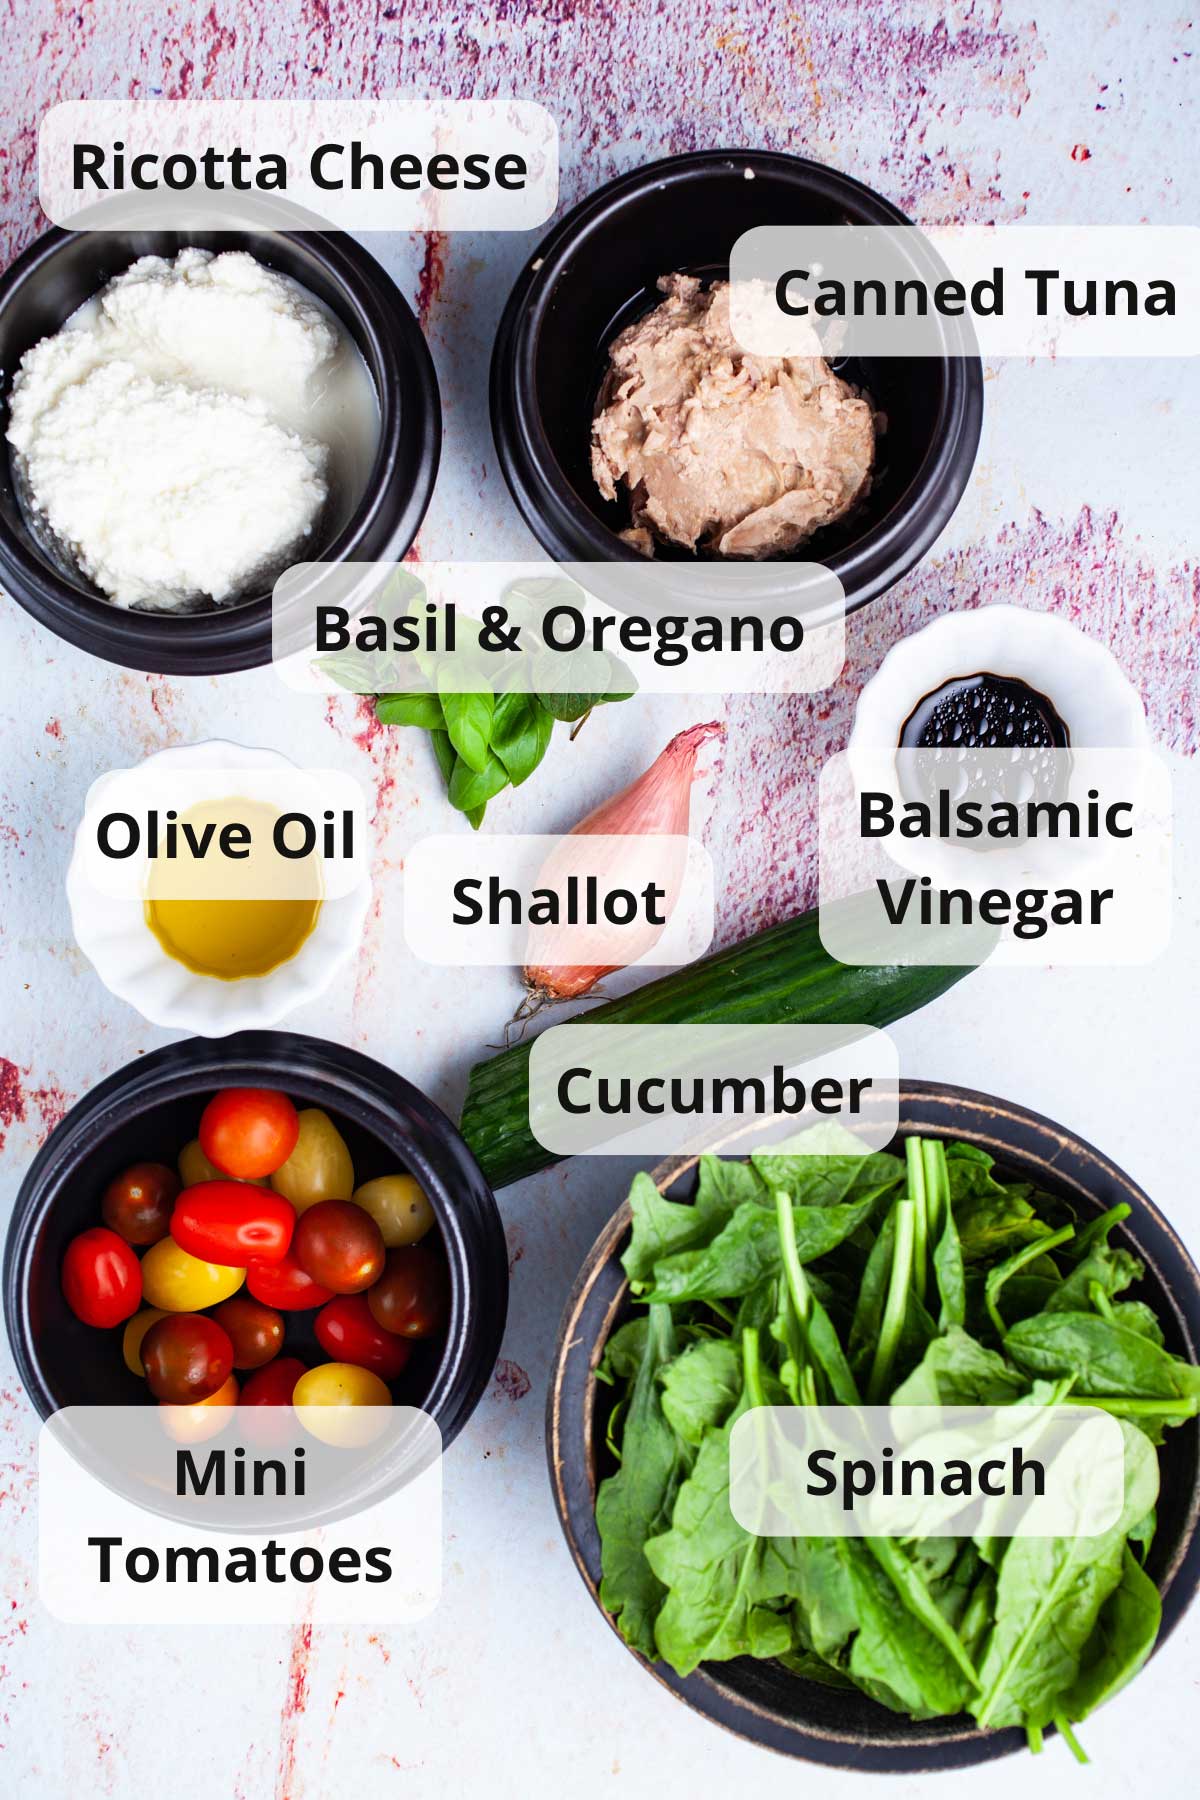 A series of ingredients on a table to make a tuna cucumber salad with ricotta cheese.